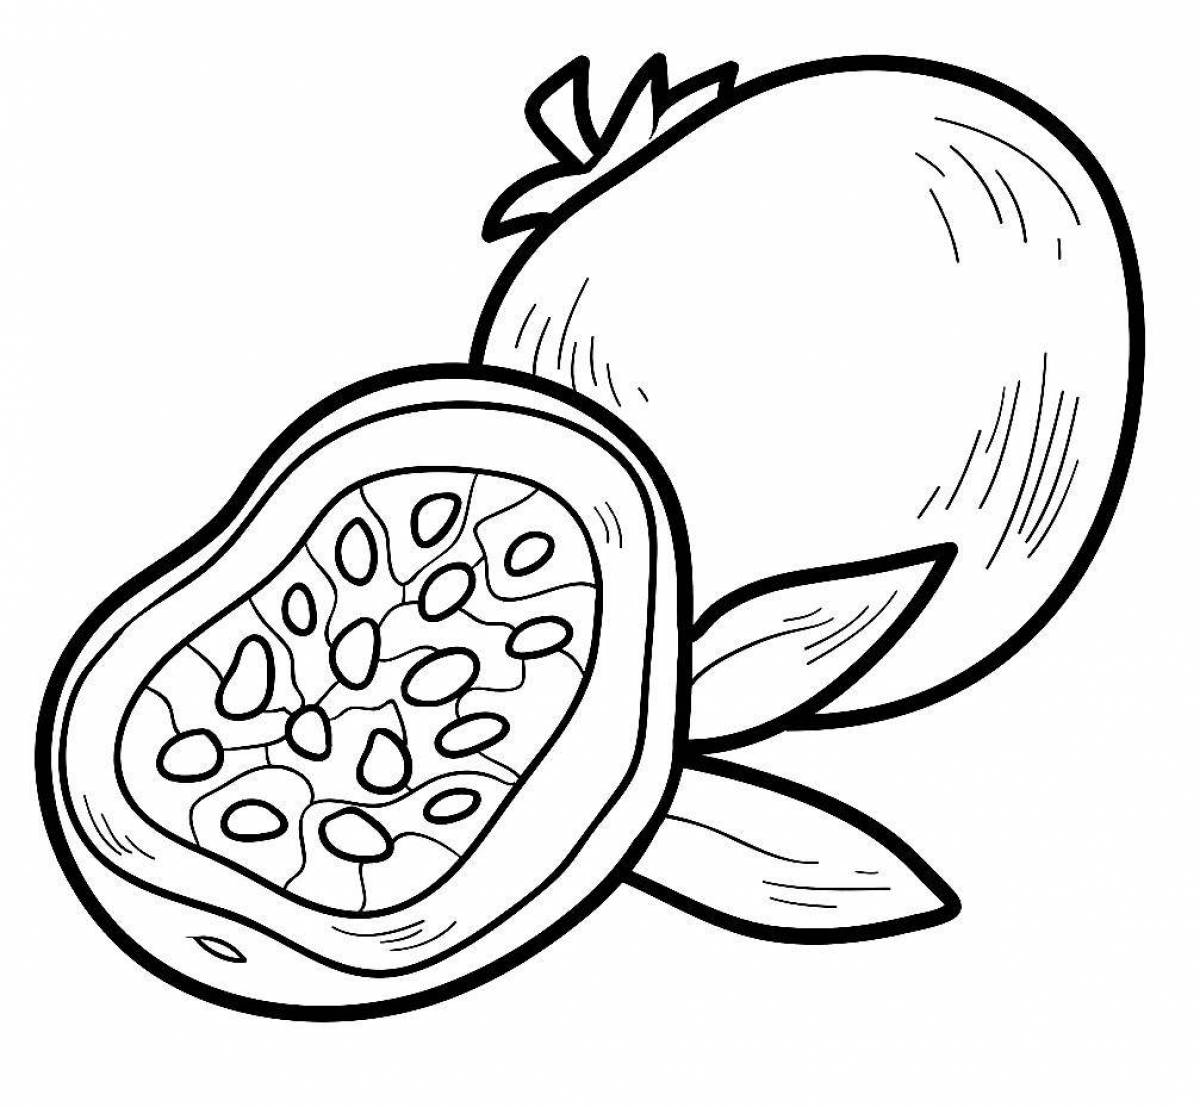 Charming passion fruit coloring book